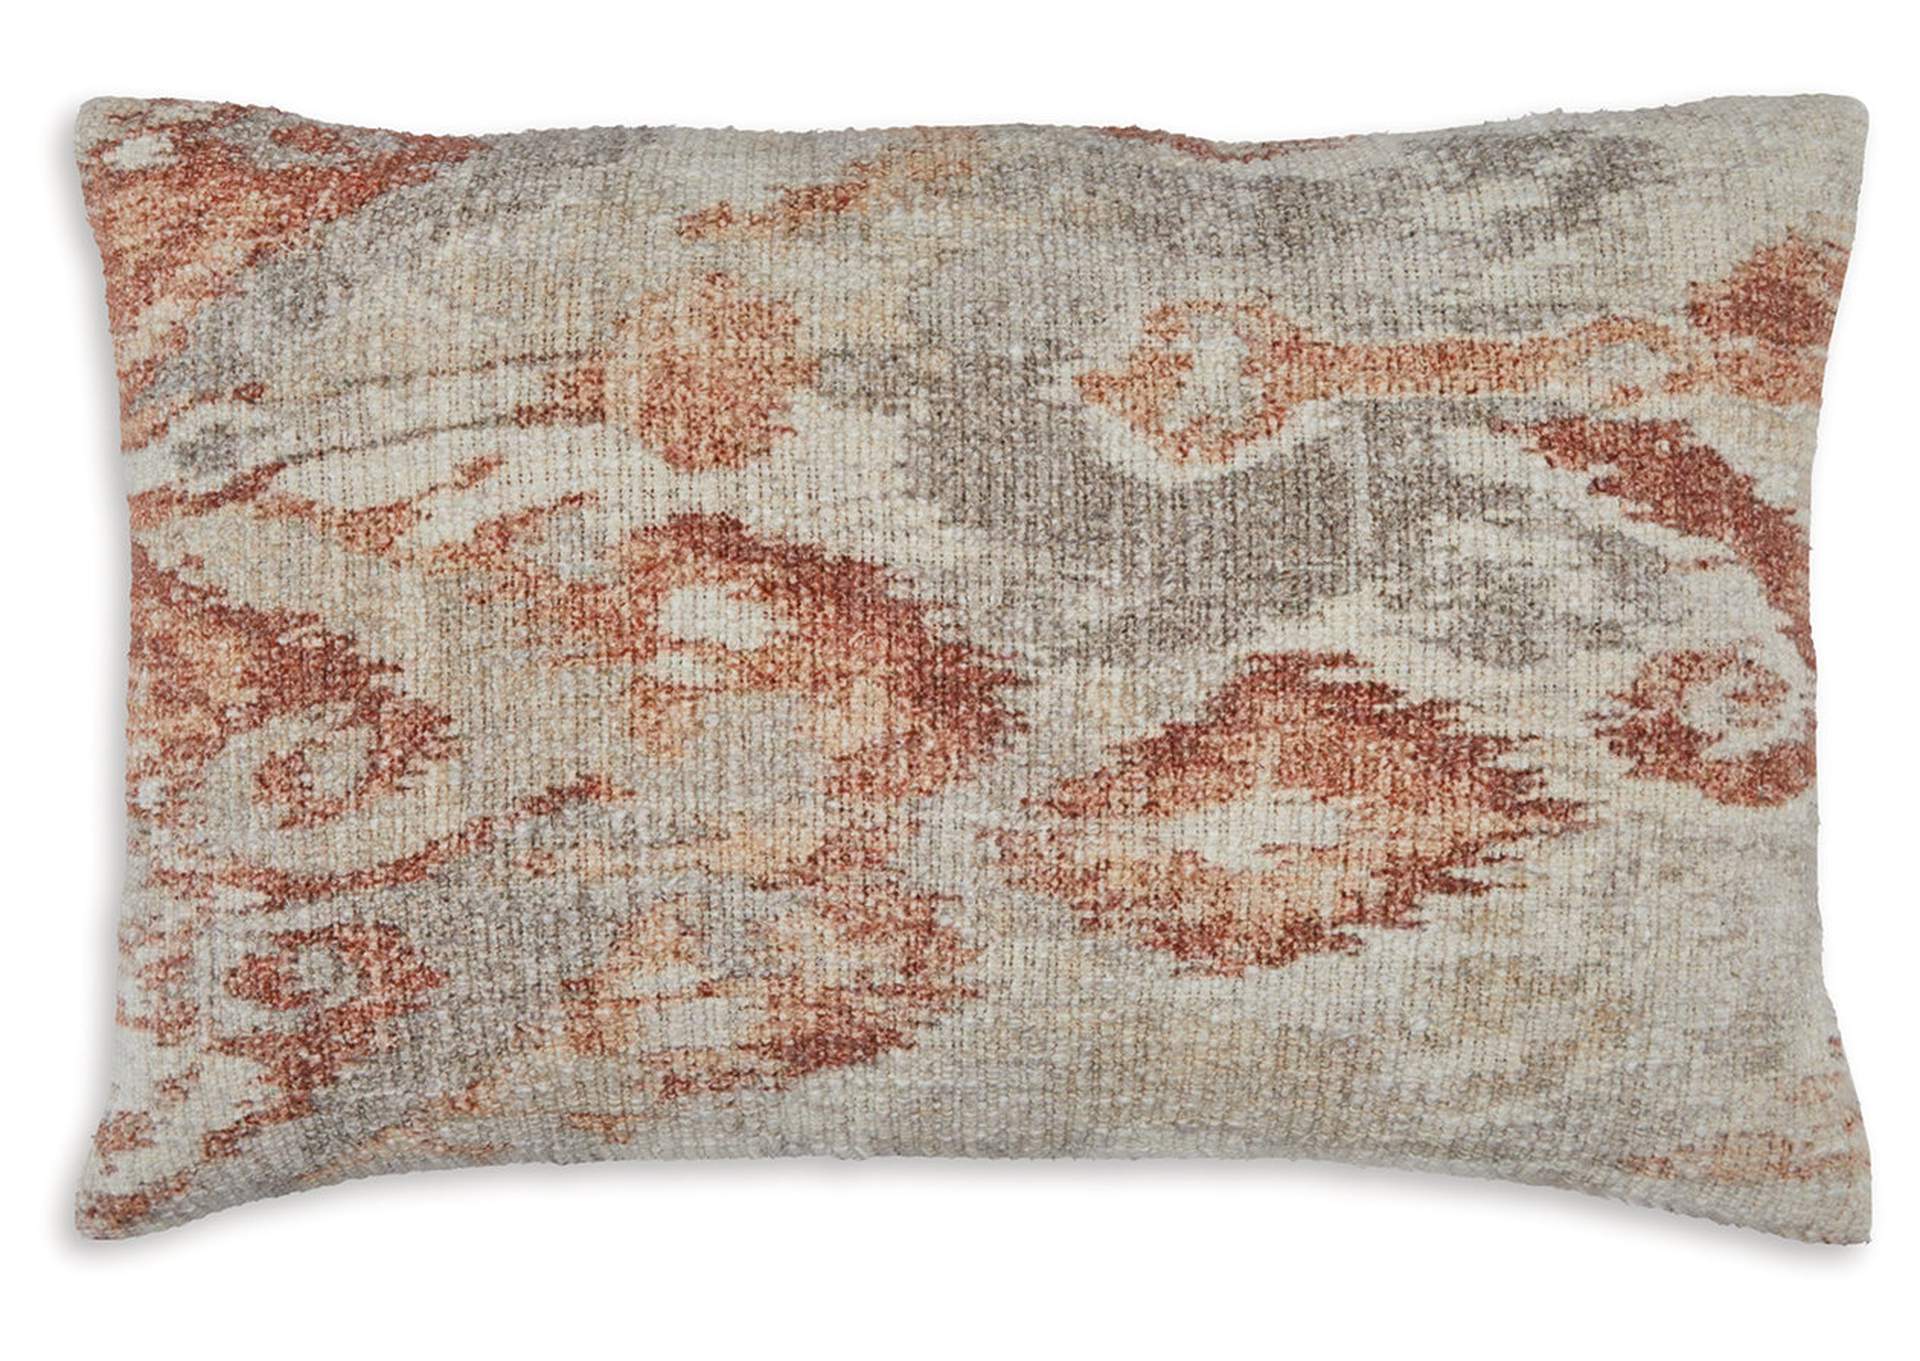 Aprover Pillow,Signature Design By Ashley